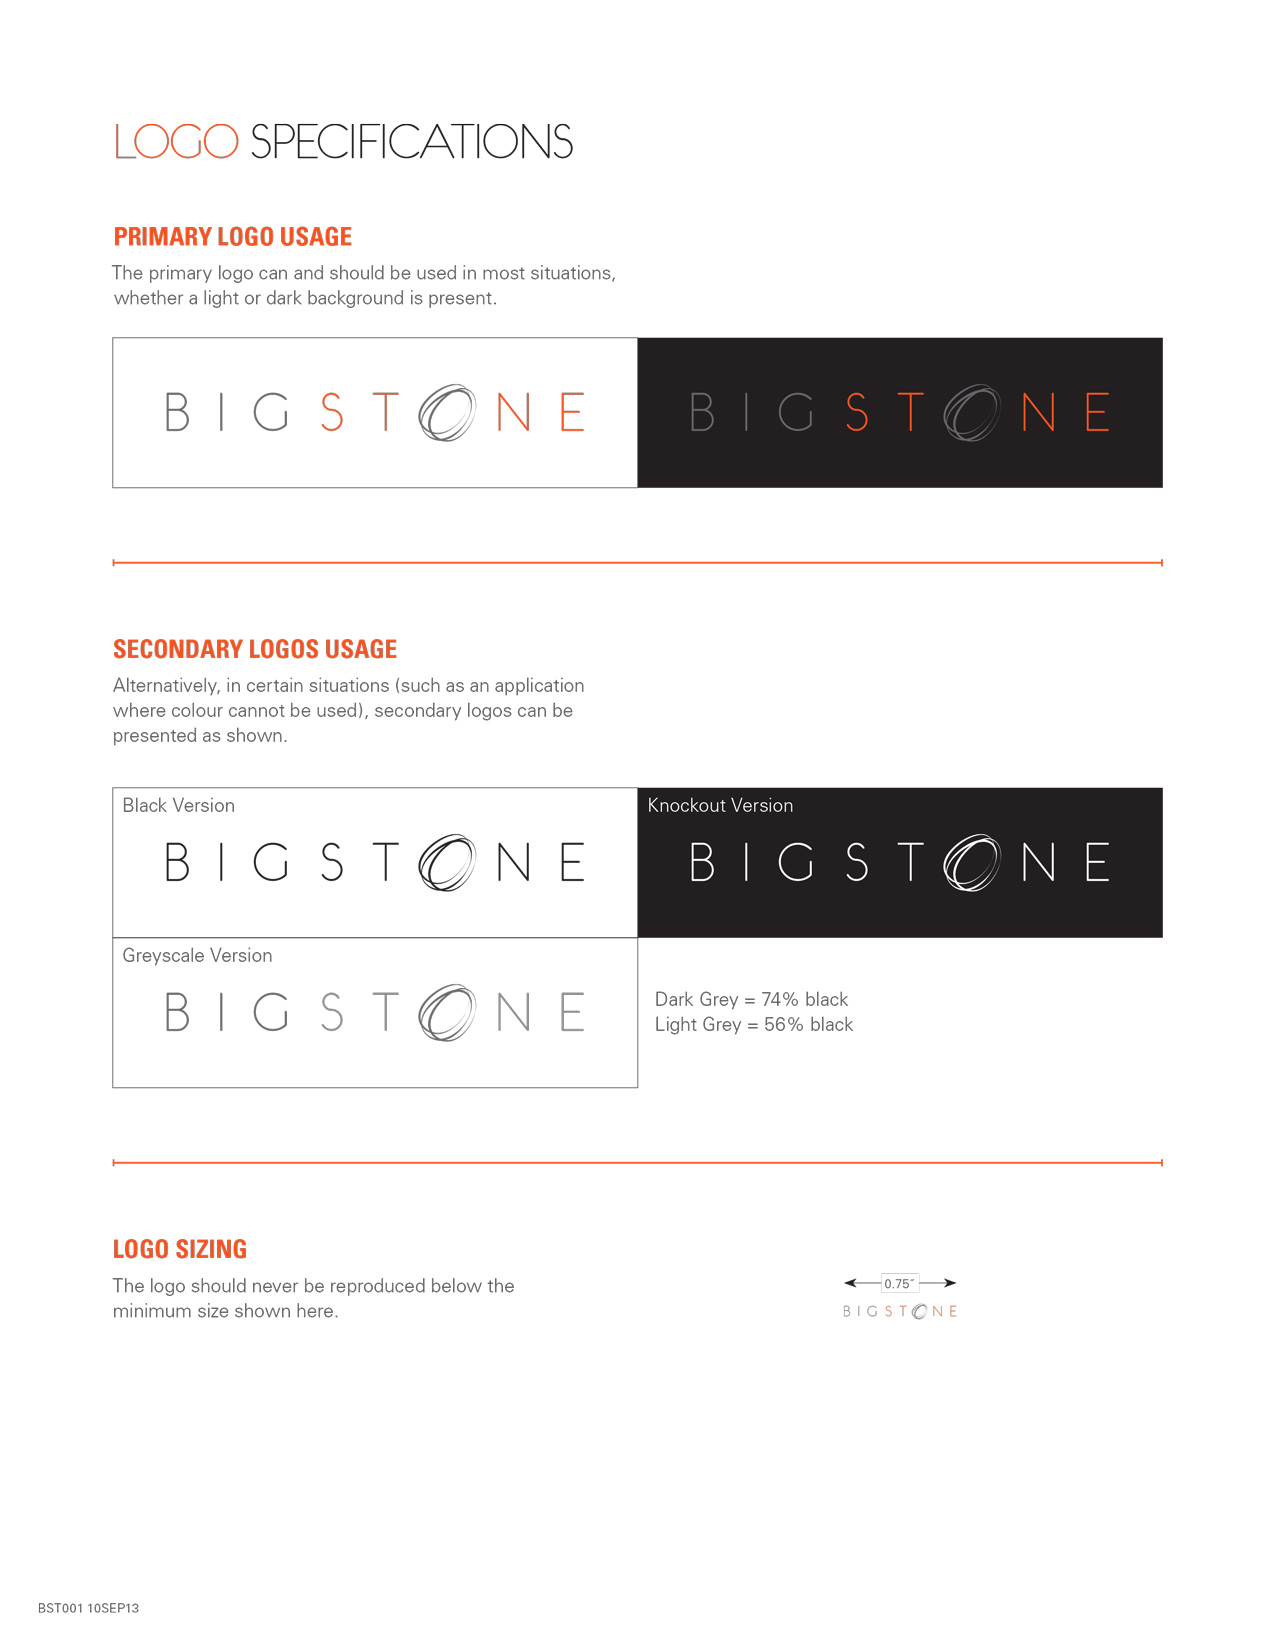 Brand Guidelines Document